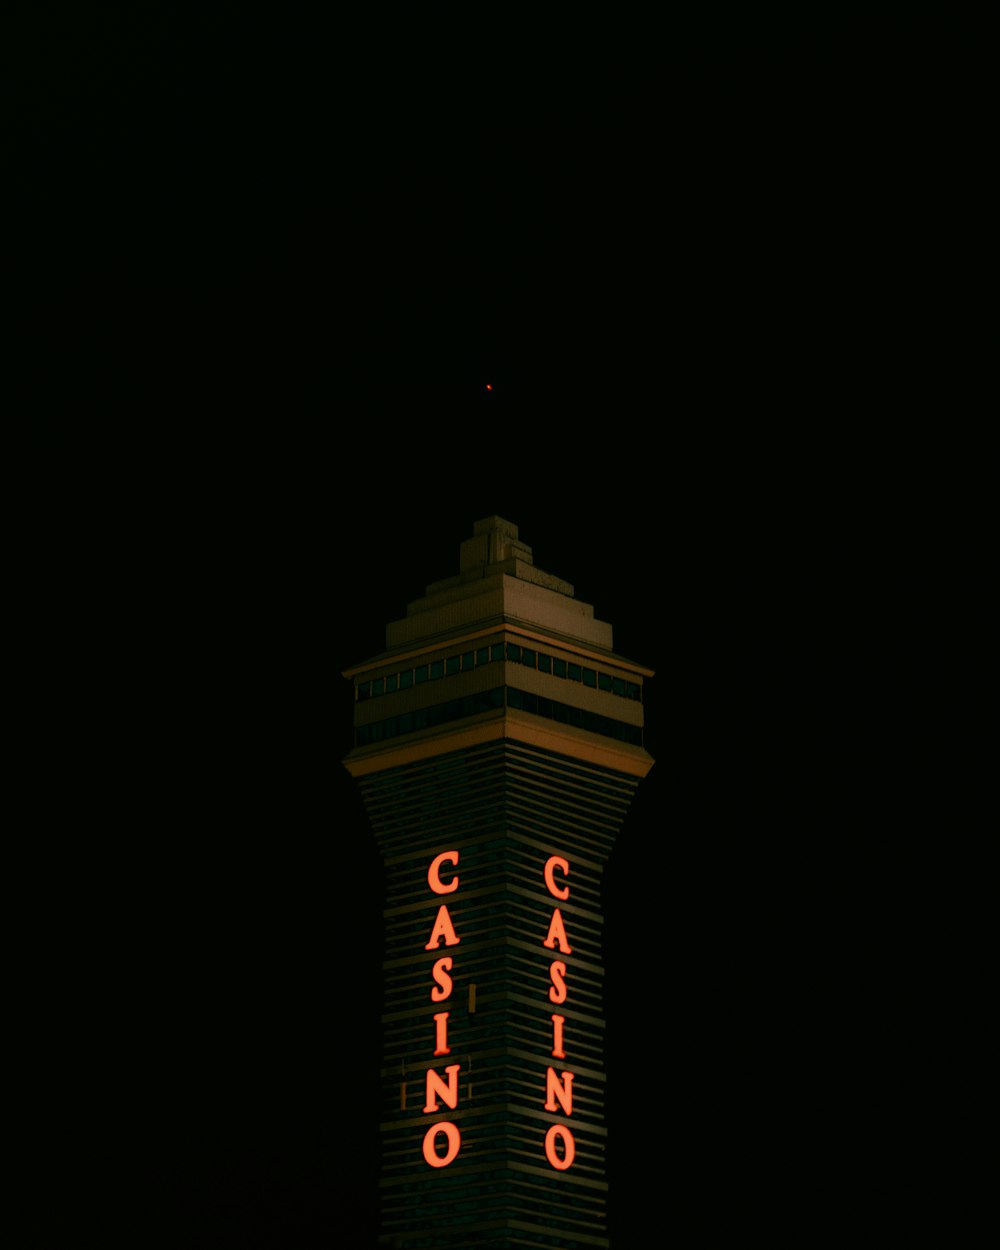 a casino sign lit up at night in the dark